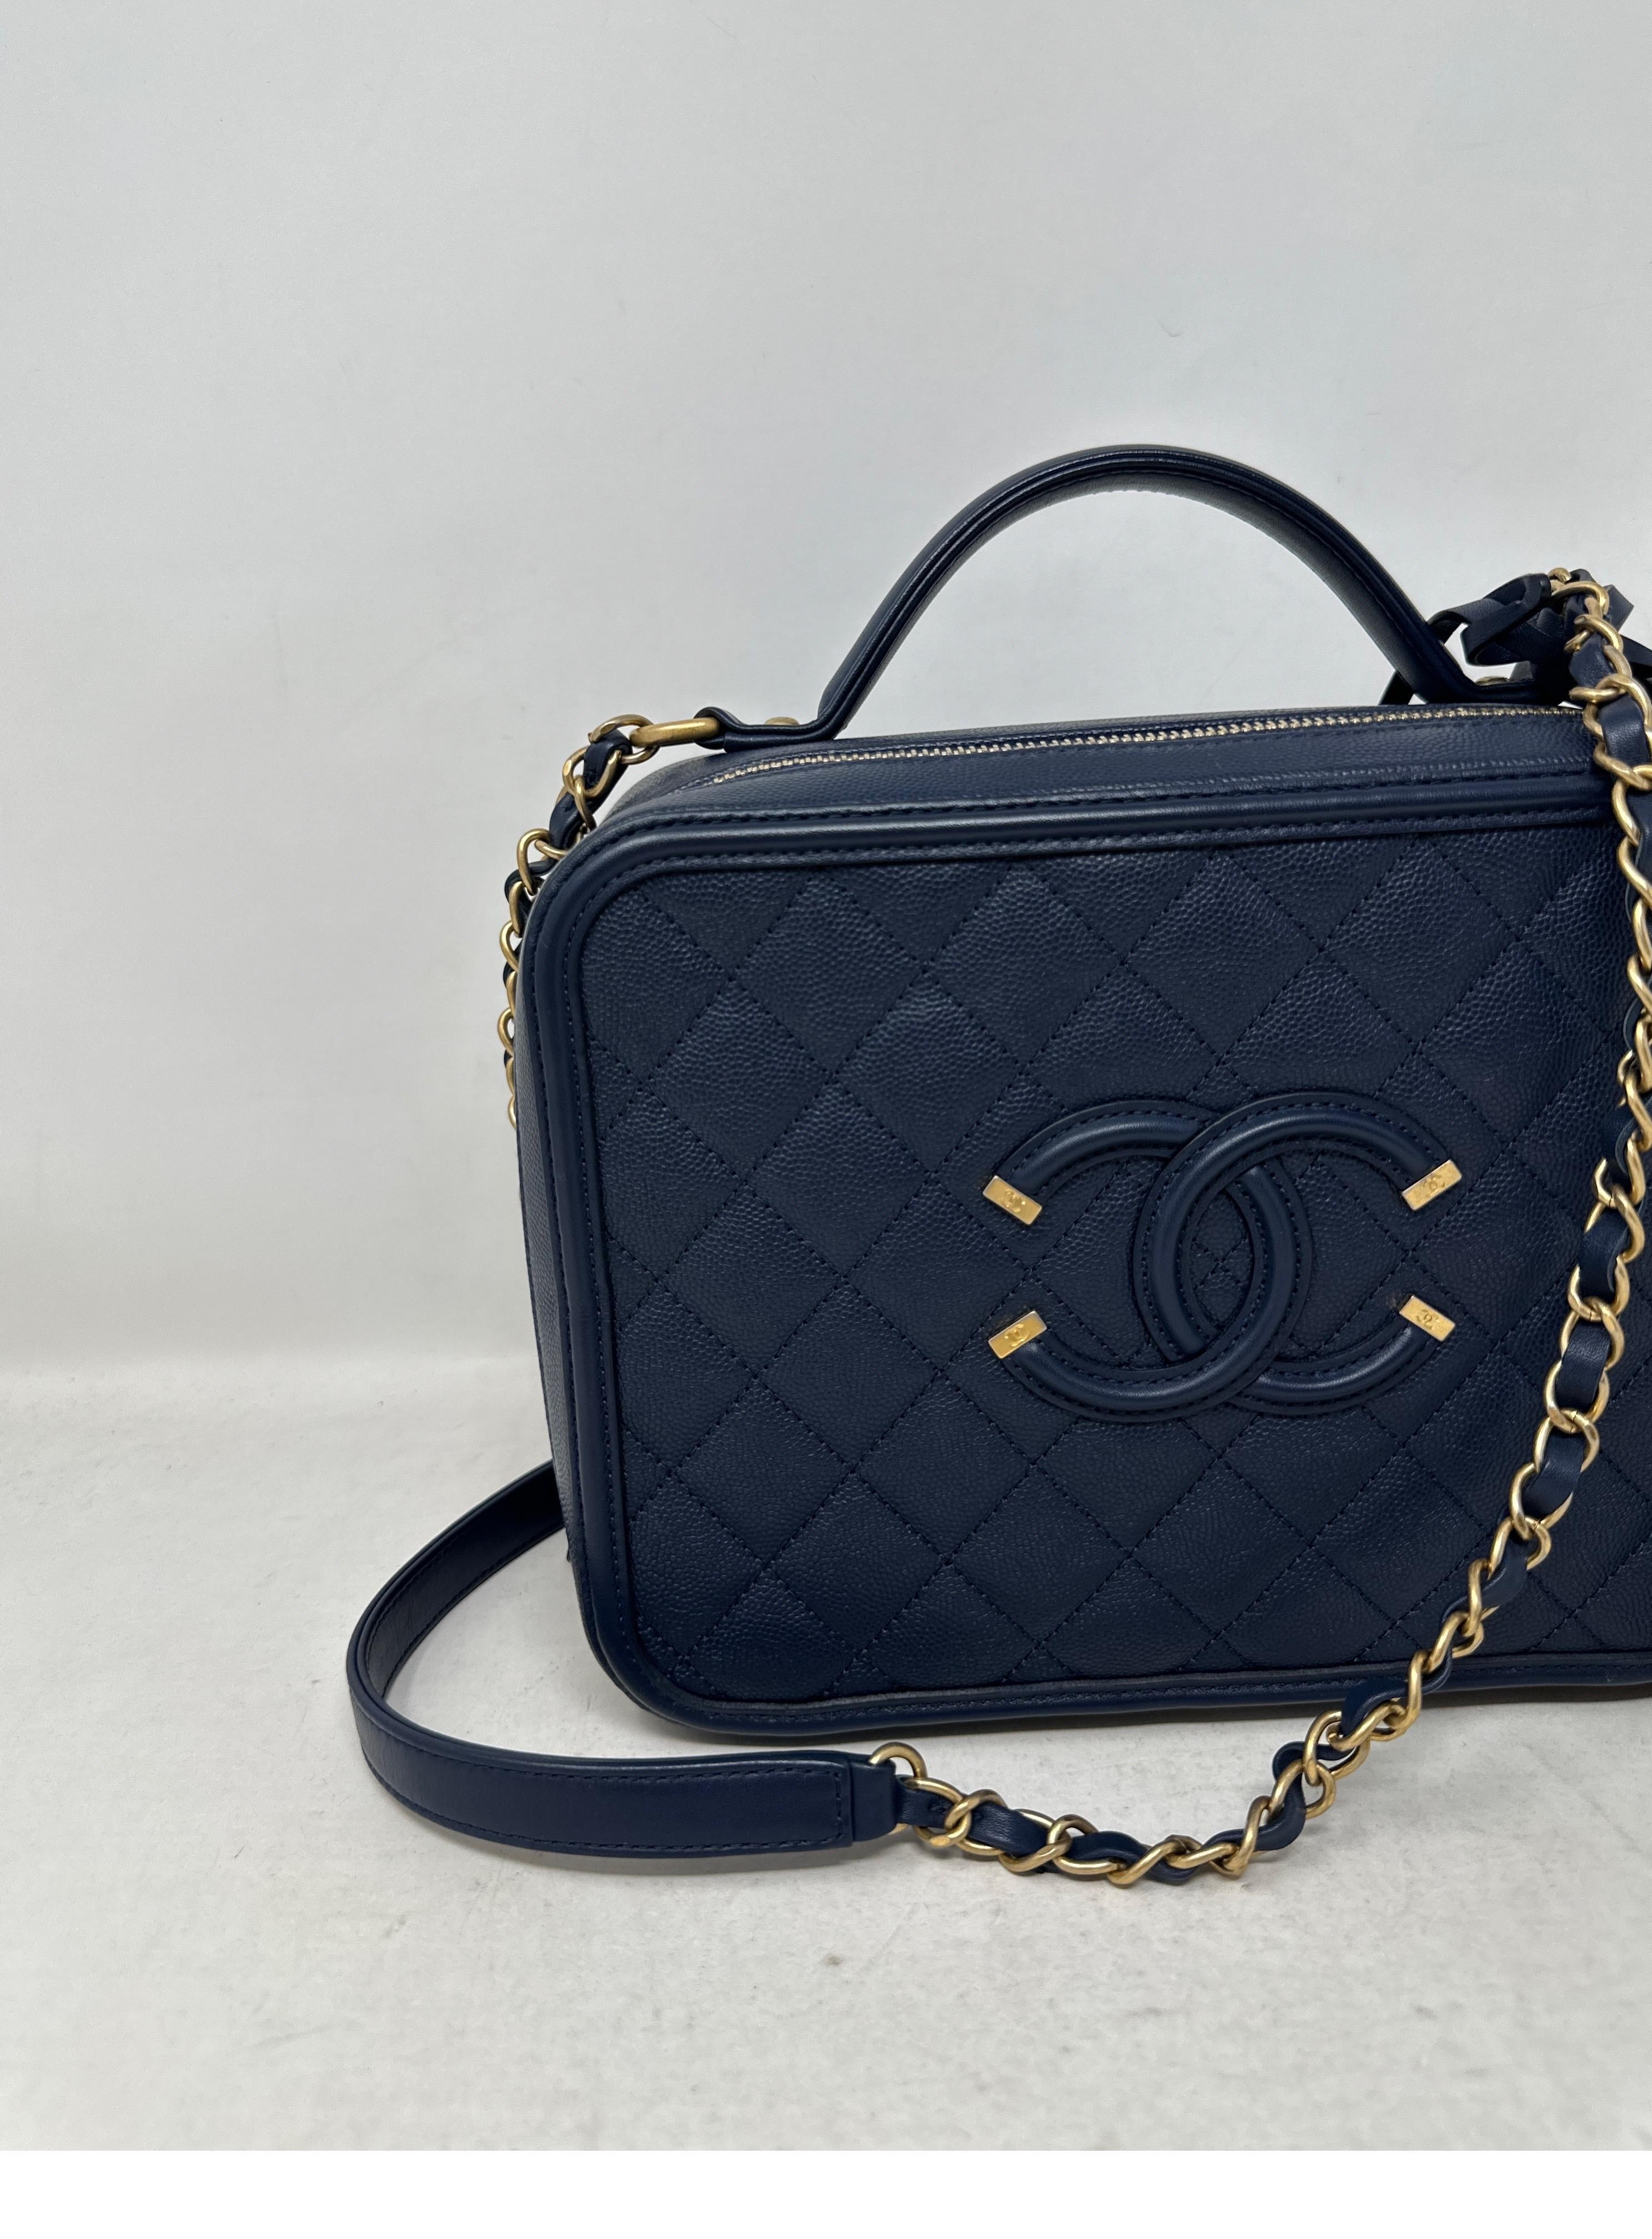 Chanel Navy Vanity Bag  In Excellent Condition For Sale In Athens, GA